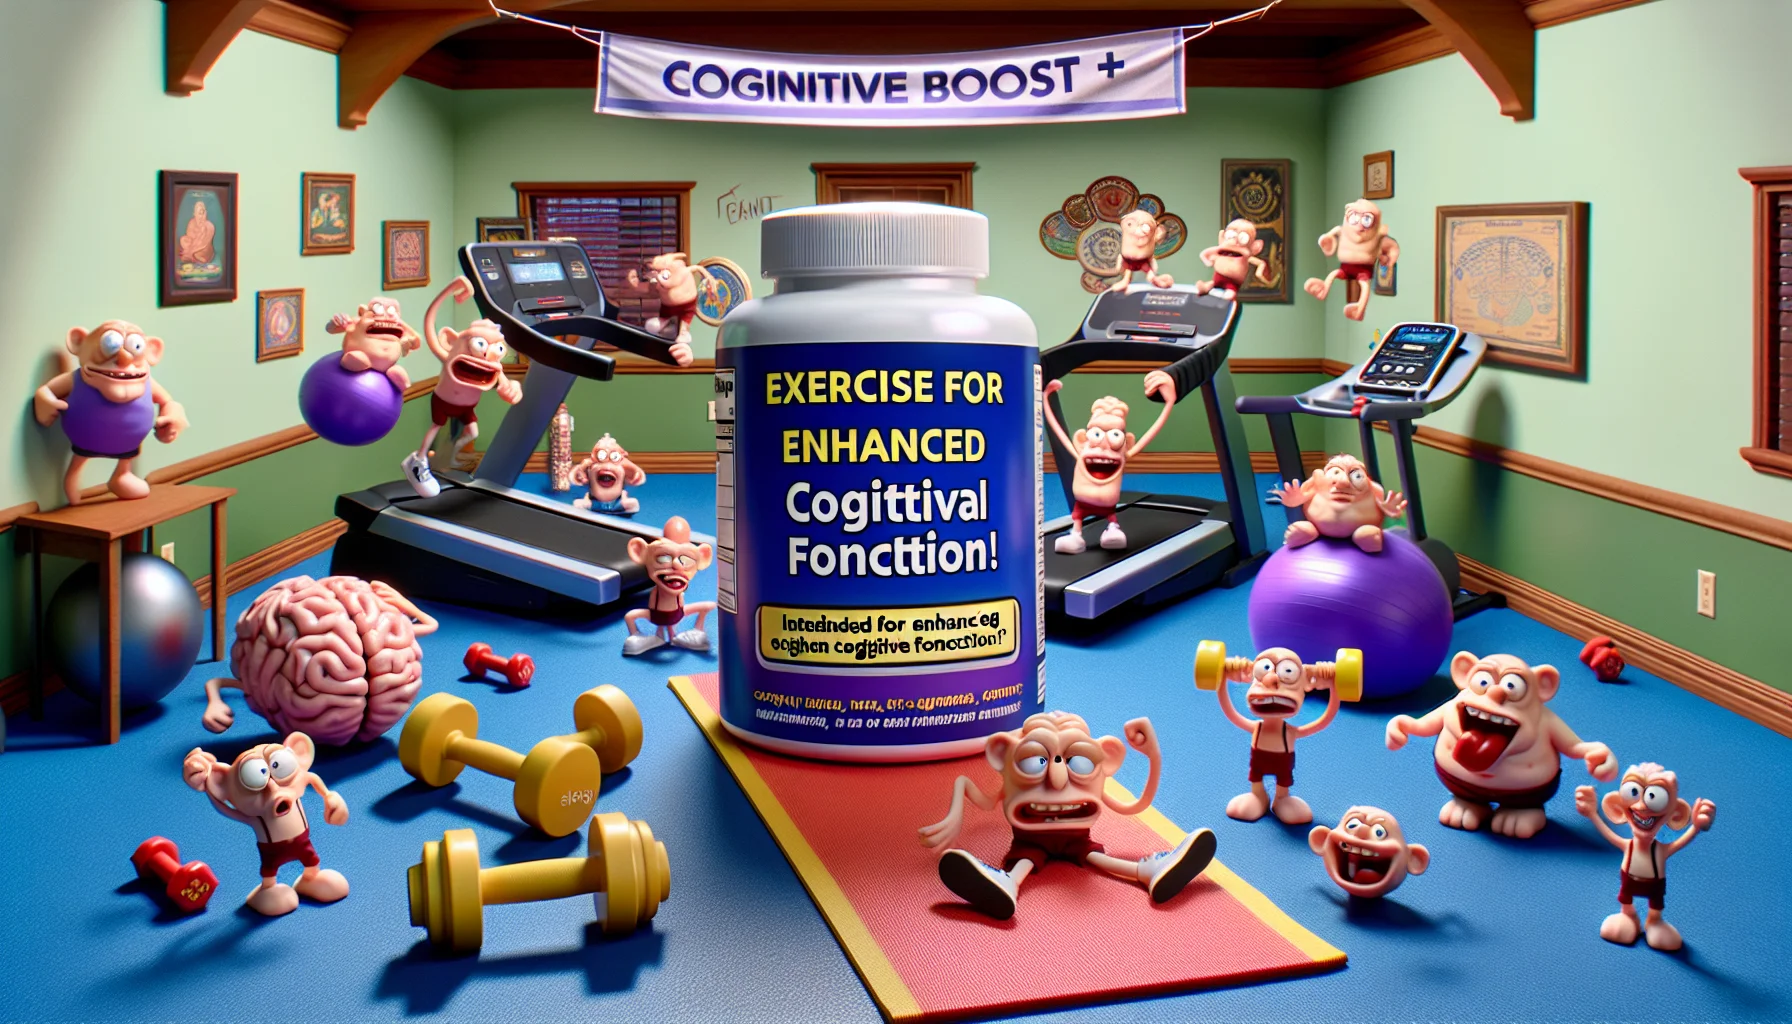 Picture a hilarious scene that entices people to exercise more. The central object is a mock up bottle of a generic brain supplement named 'Cognitive Boost+,': intended for enhancing cognitive function. The bottle is surrounded by comedic elements connected to exercising: dumbbells that squeak like toys, a treadmill with cartoonishly fast speed settings, and a yoga mat that’s unfurled like a red carpet. A banner in the scene says 'Exercise for enhanced cognitive function!'. The overall ambiance is playful and energetic.